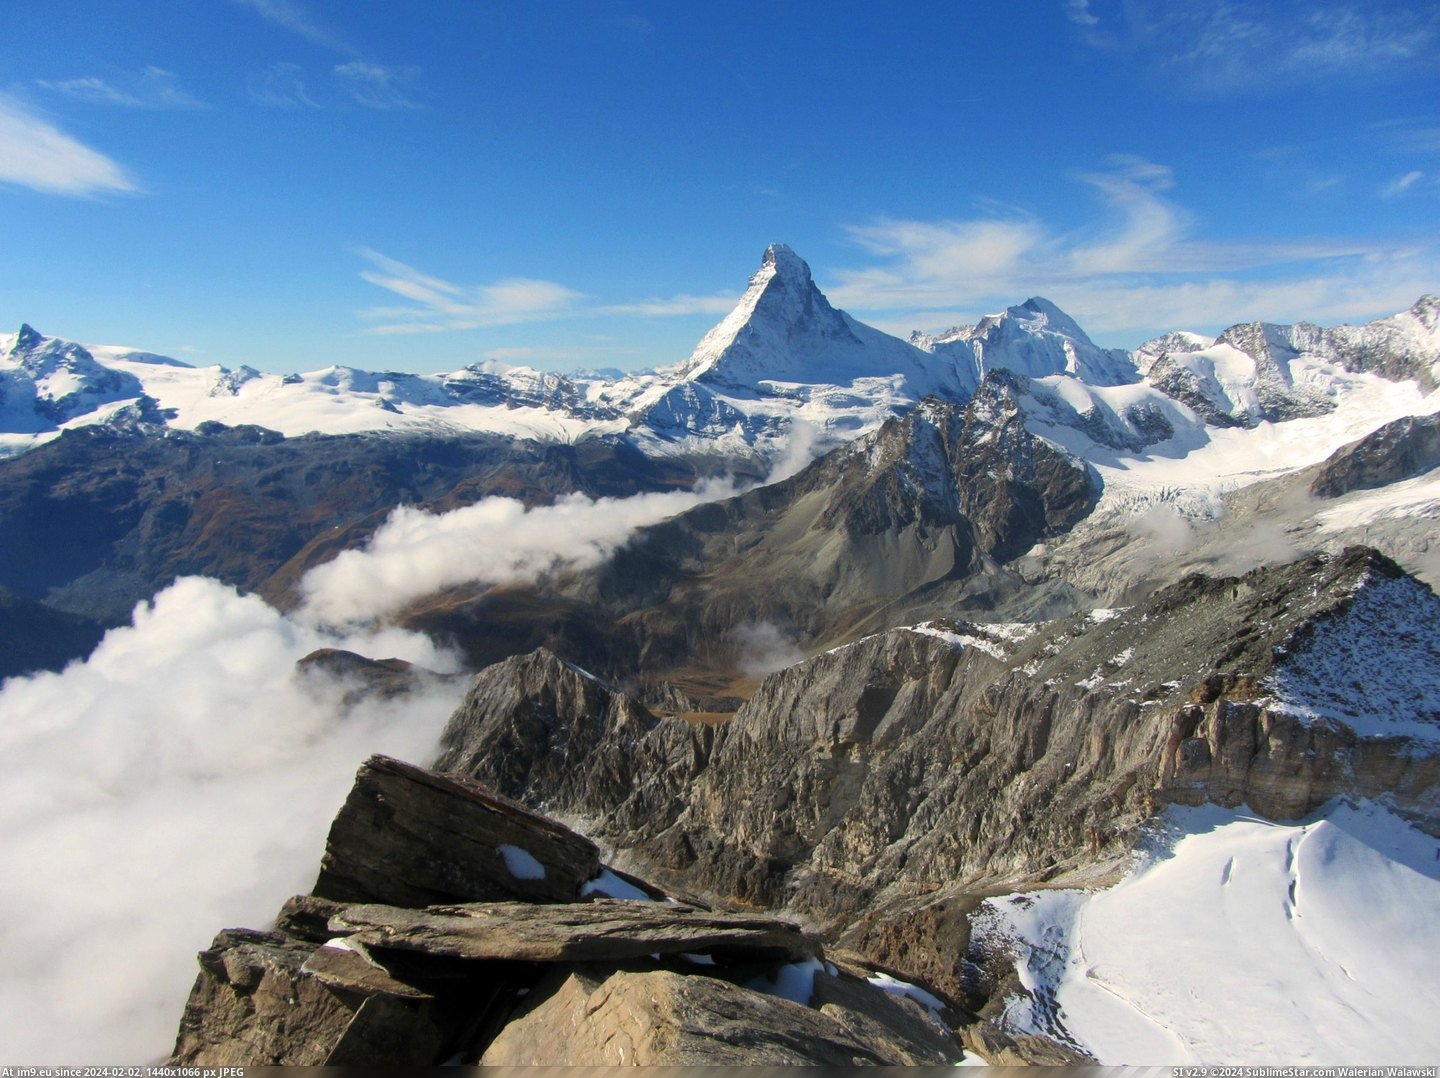 #Famous #Alps #Matterhorn #Peak [Earthporn] Looking over to the Matterhorn, most famous peak of the alps [2783x2074][OC] Pic. (Изображение из альбом My r/EARTHPORN favs))